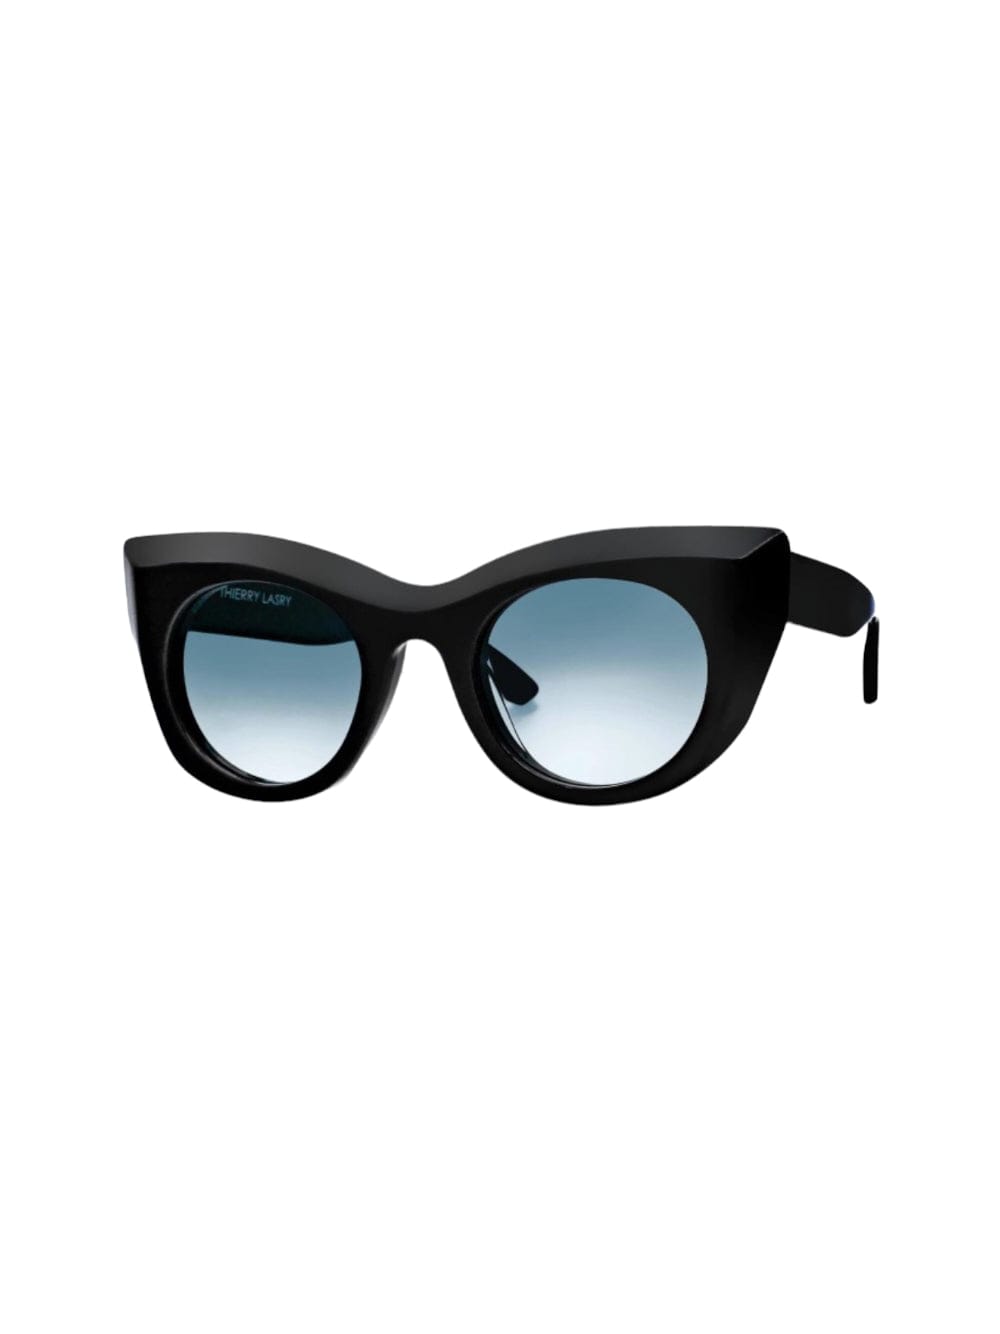 Thierry Lasry Climaxxxy - Black Sunglasses